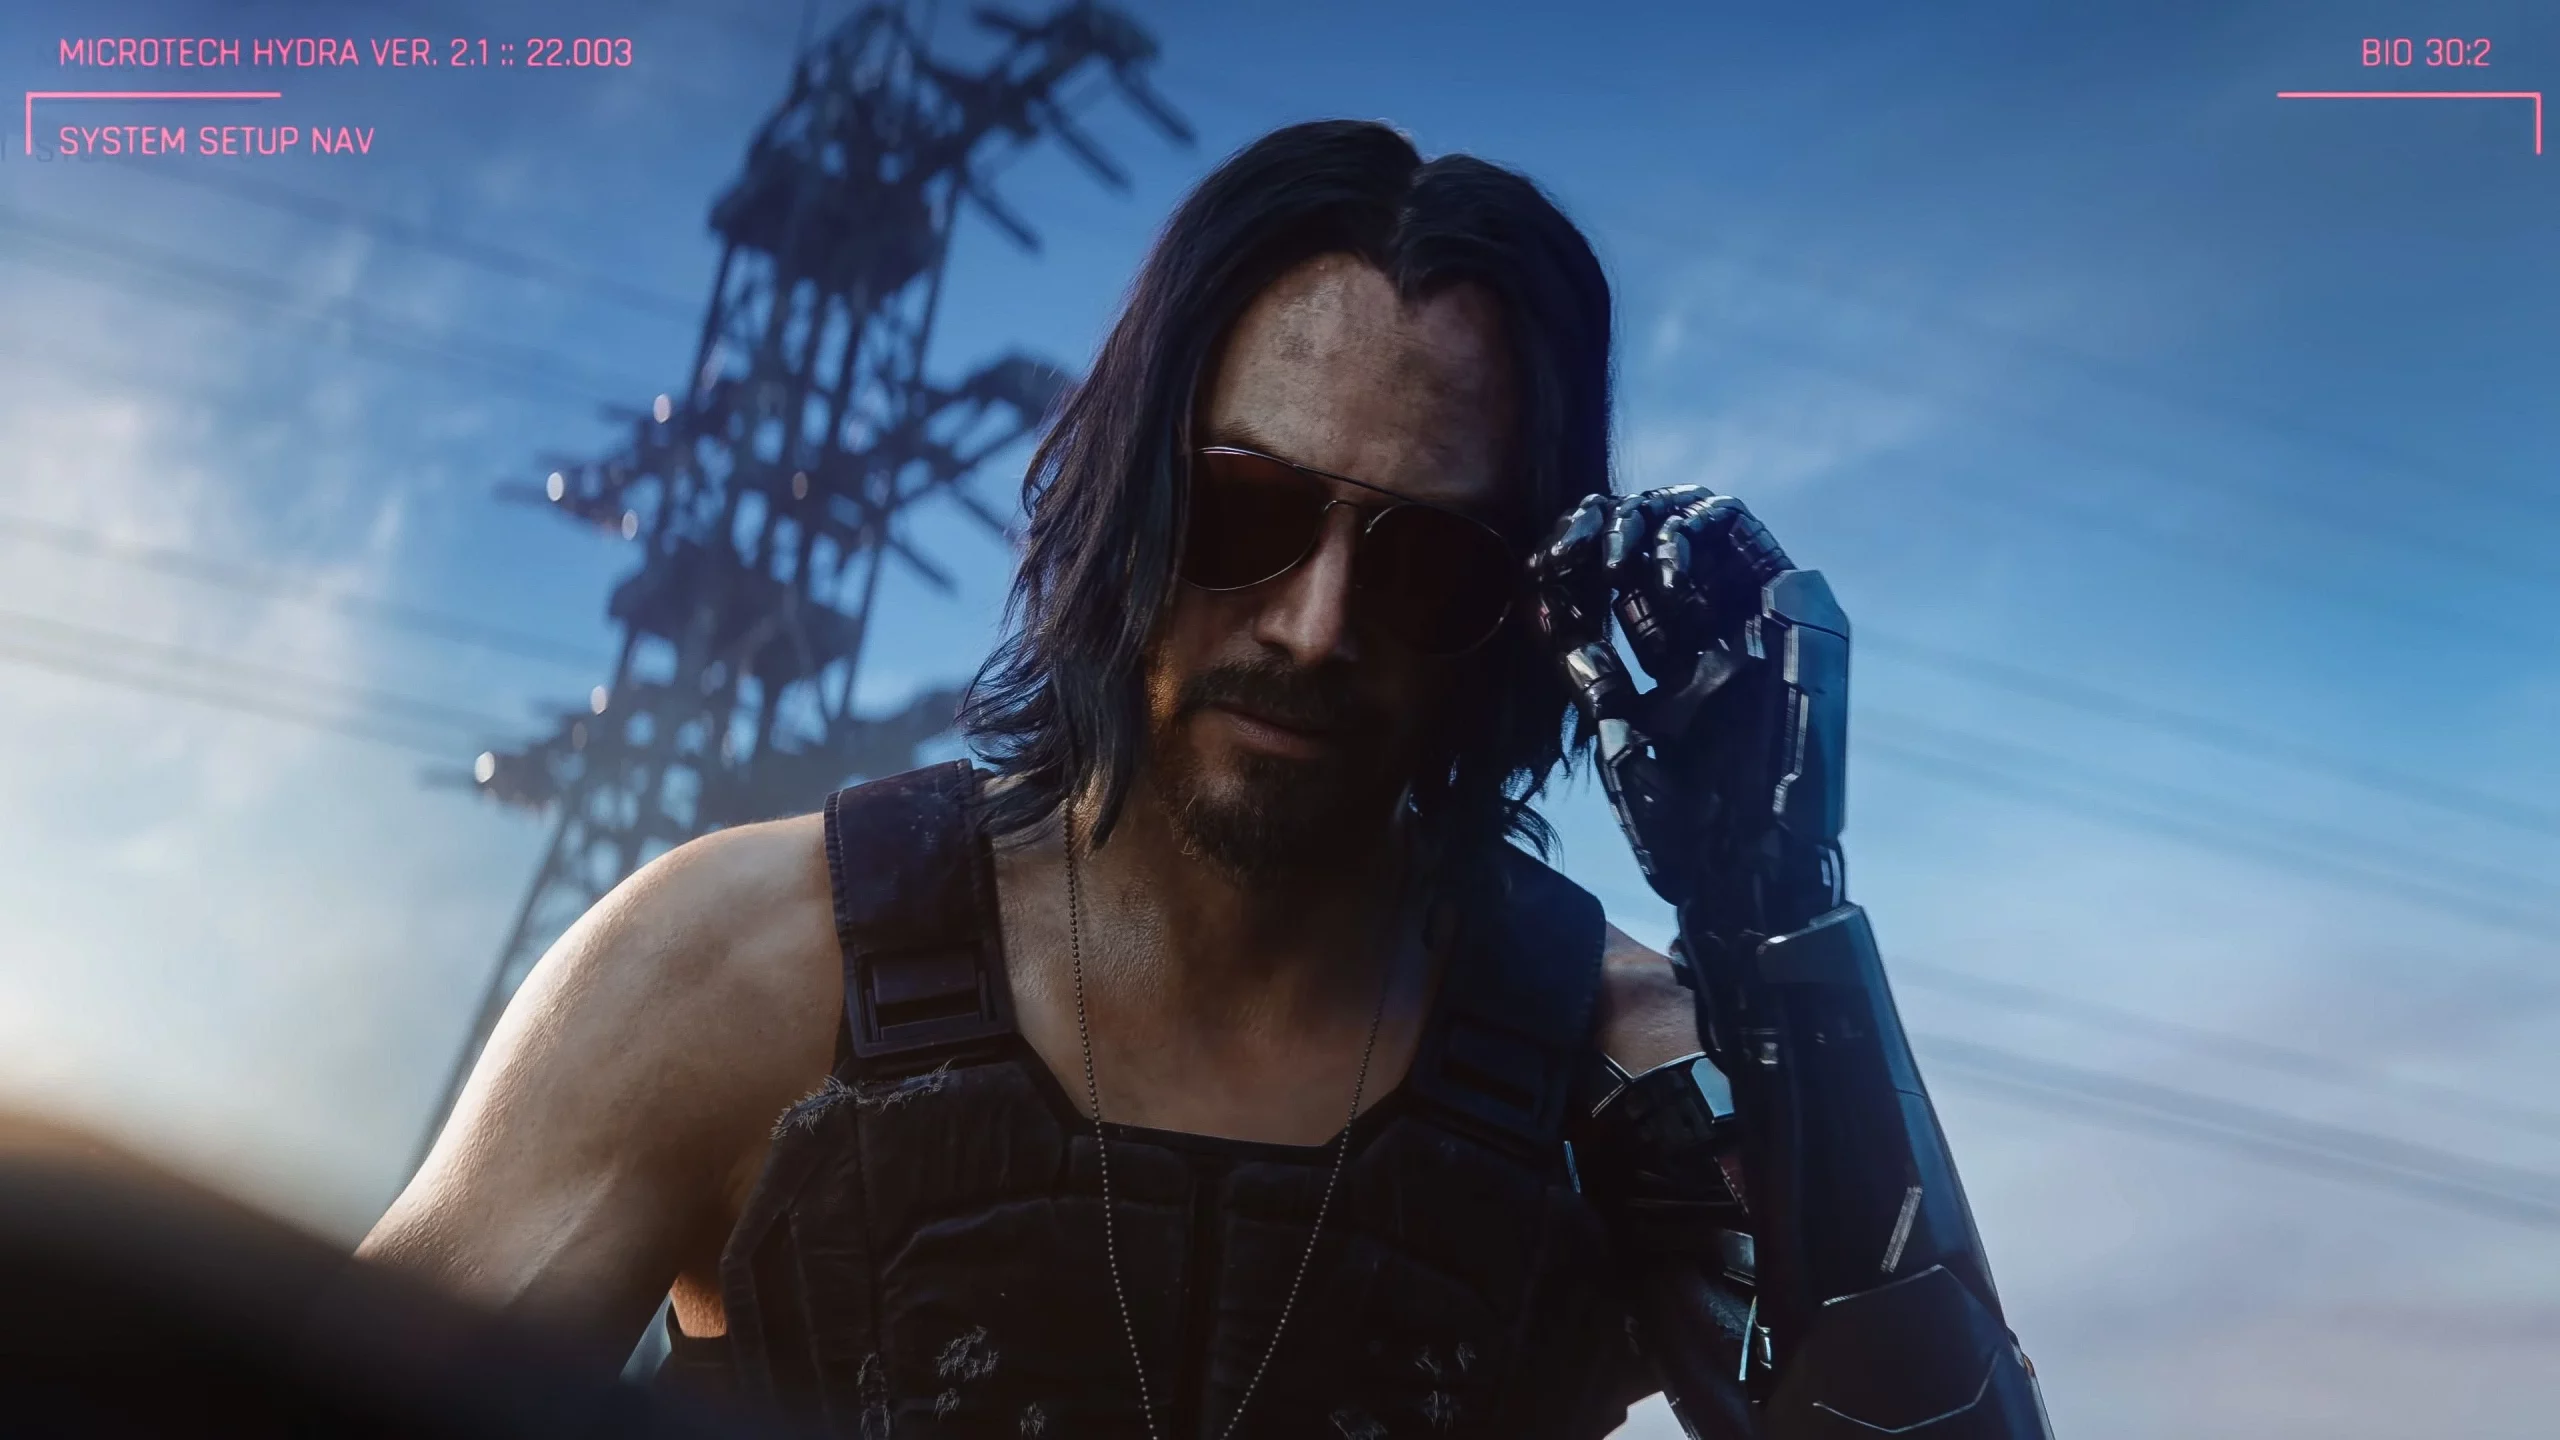 Keanu Reeves' character acts as a guiding figure in Cyberpunk 2077.